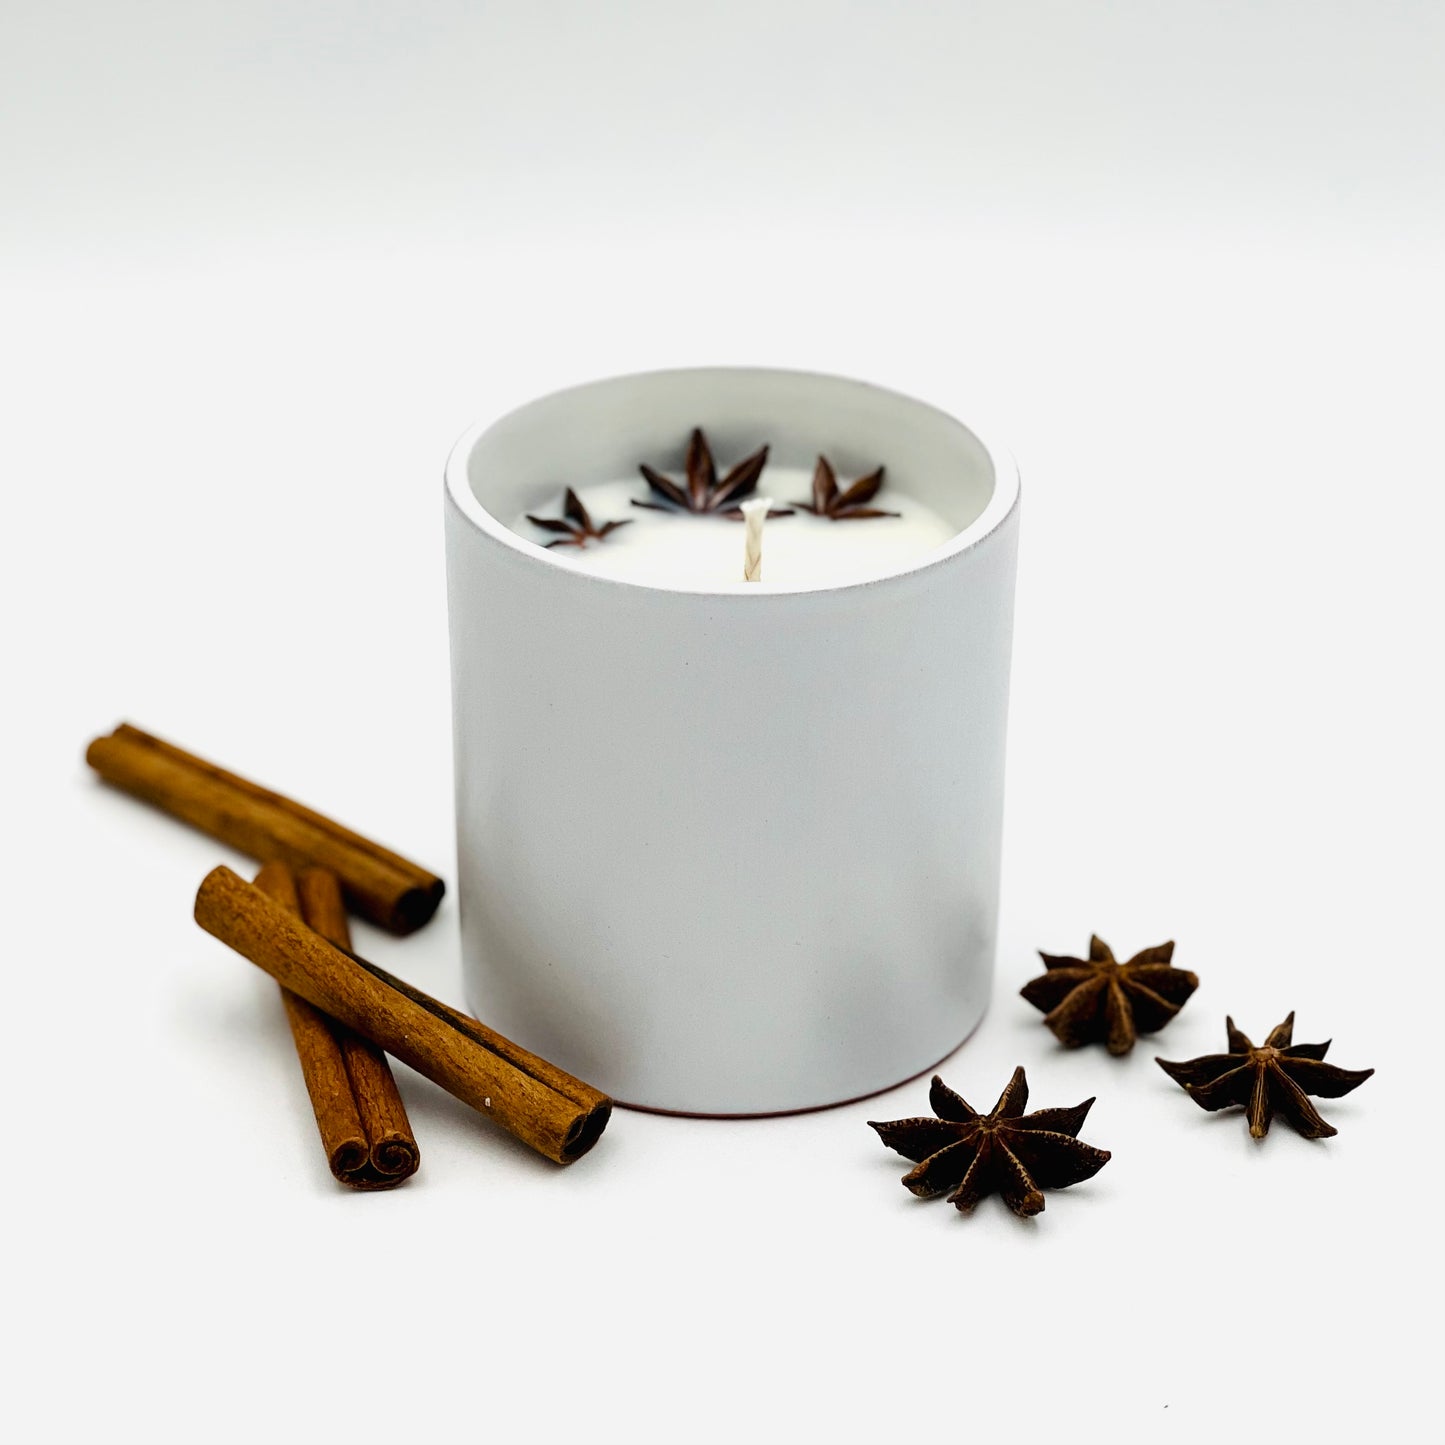 Soy wax candle in a ceramic container "Winter Morning"